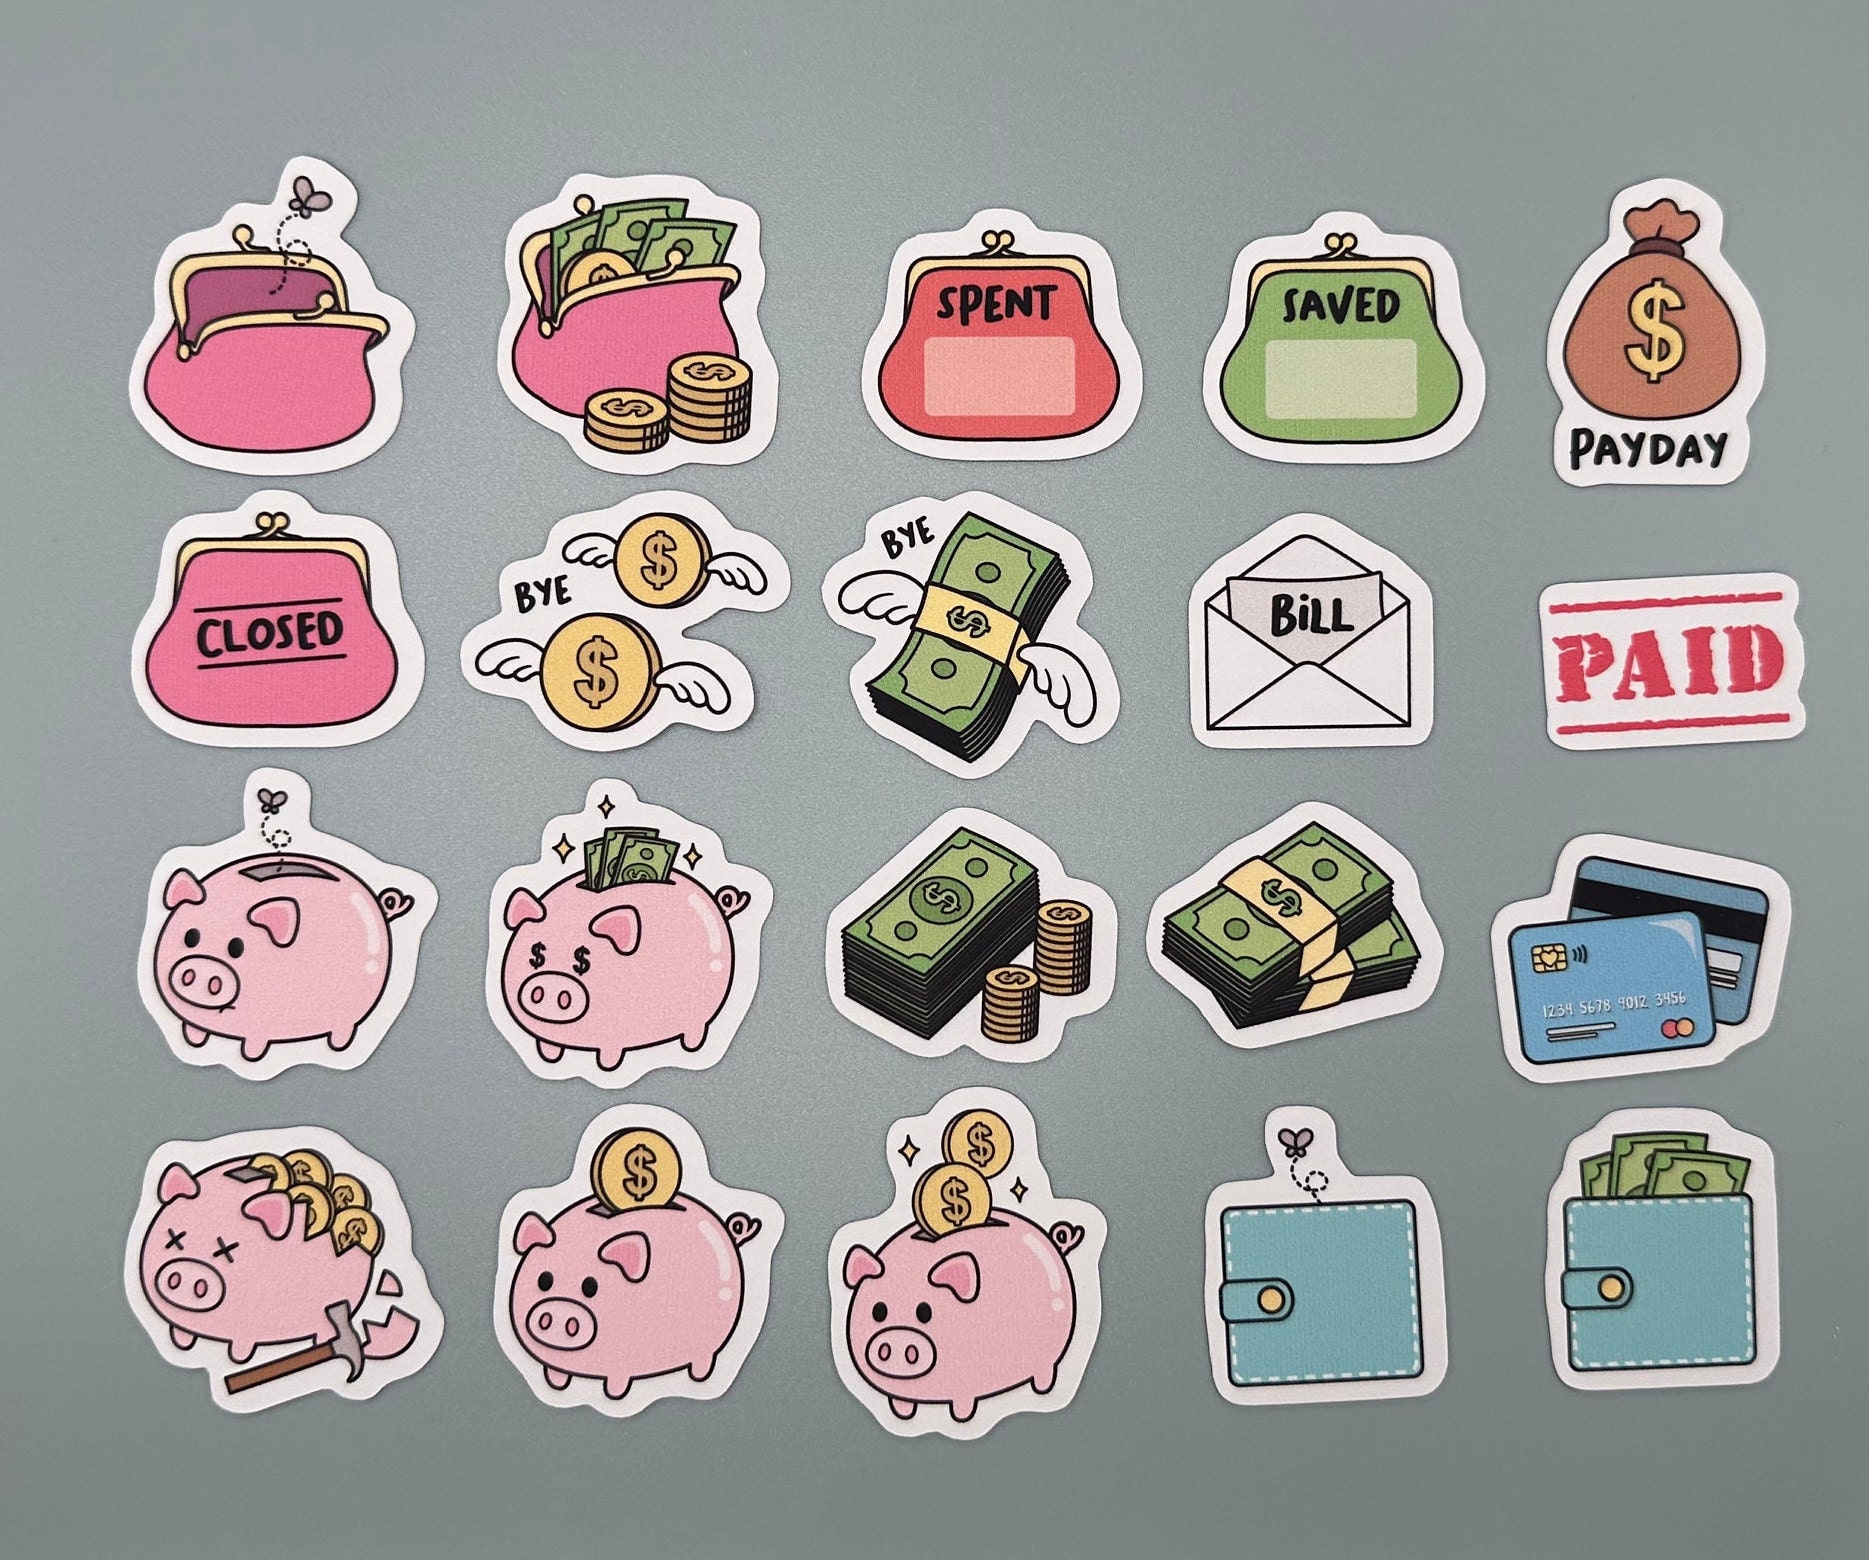 Cute Food Stickers Set of 9 Perfect for Planners, Bullet Journals, and  Laptops High-quality Vinyl Stickers -  Sweden